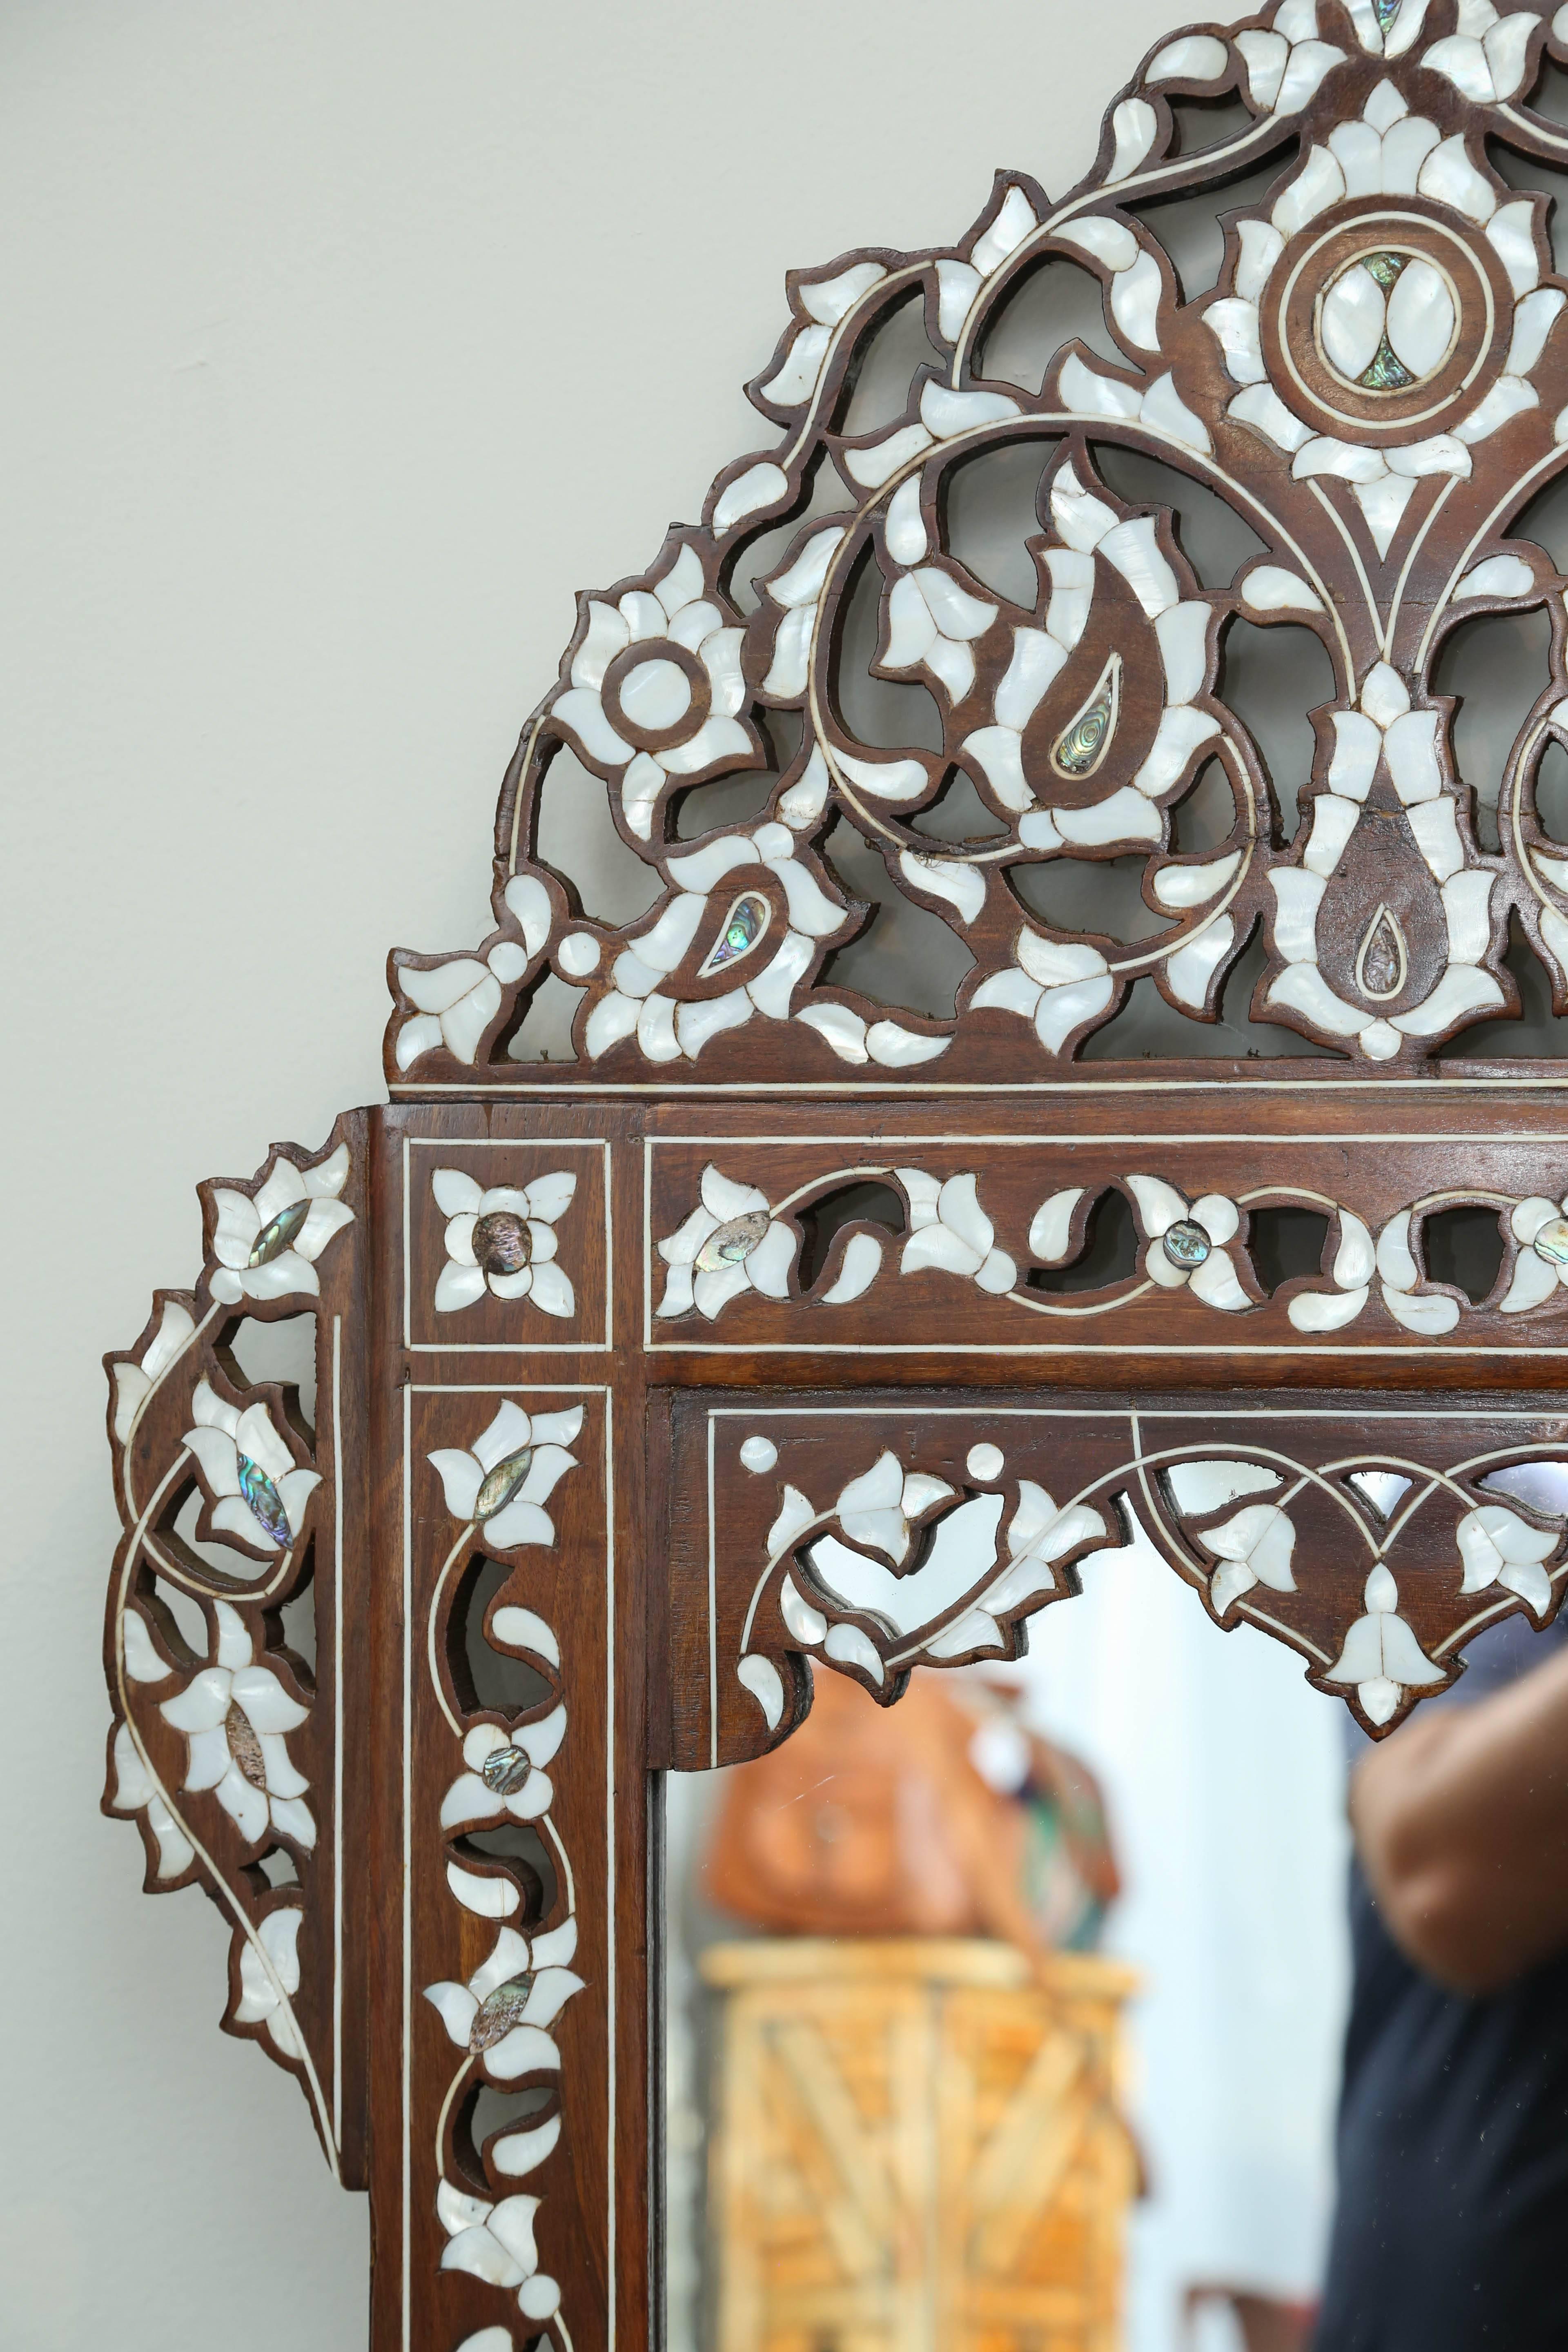 Vintage mirror circa 1970s from Syria with gorgeous mother-of-pearl detailing.
        